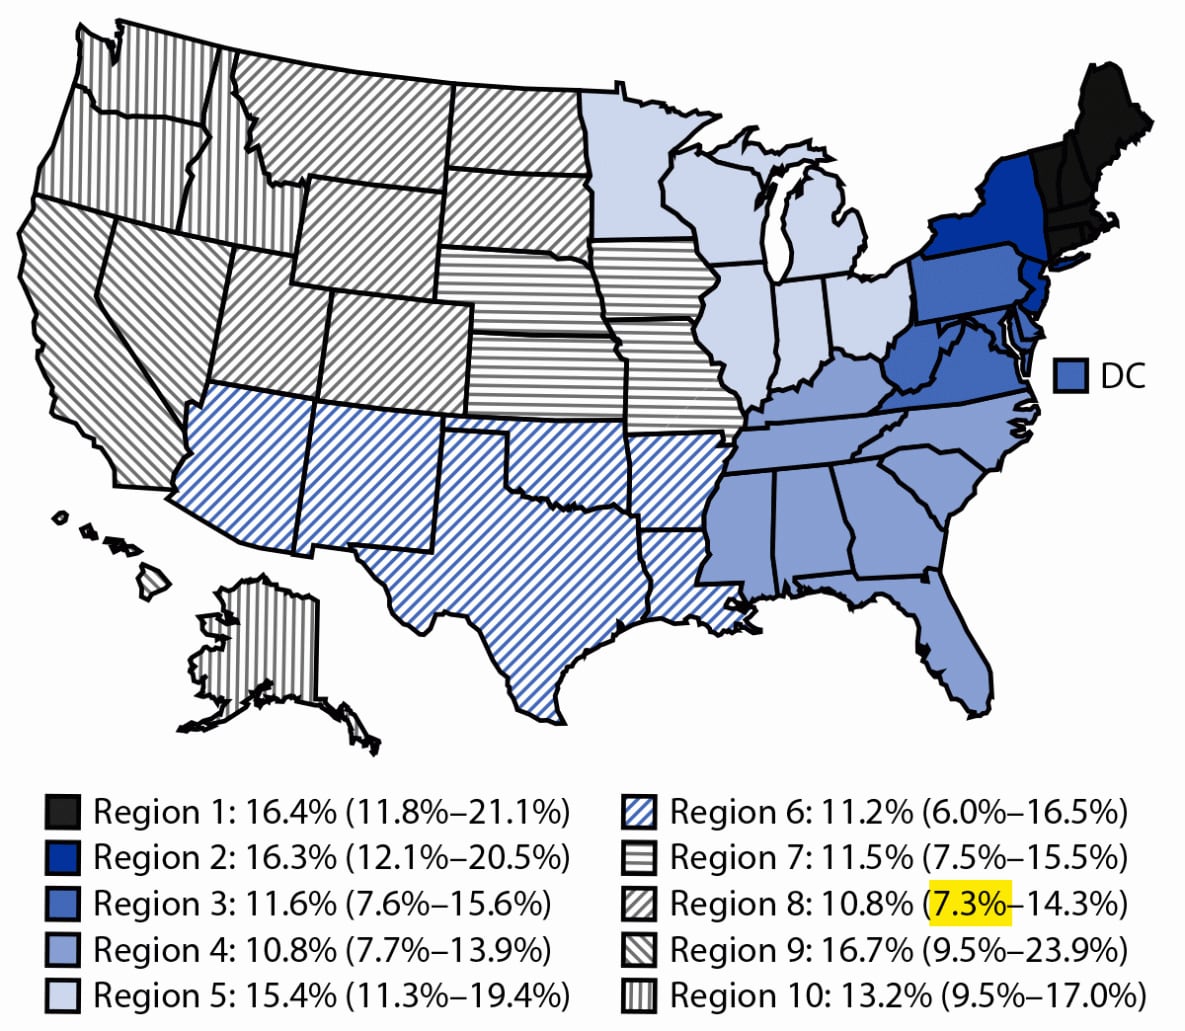 The figure is a map showing the estimated prevalence of current drinking among pregnant adults aged 18–49 years in the United States by U.S. Department of Health and Human Services regions using data from the Behavioral Risk Factor Surveillance System during 2018–2020.